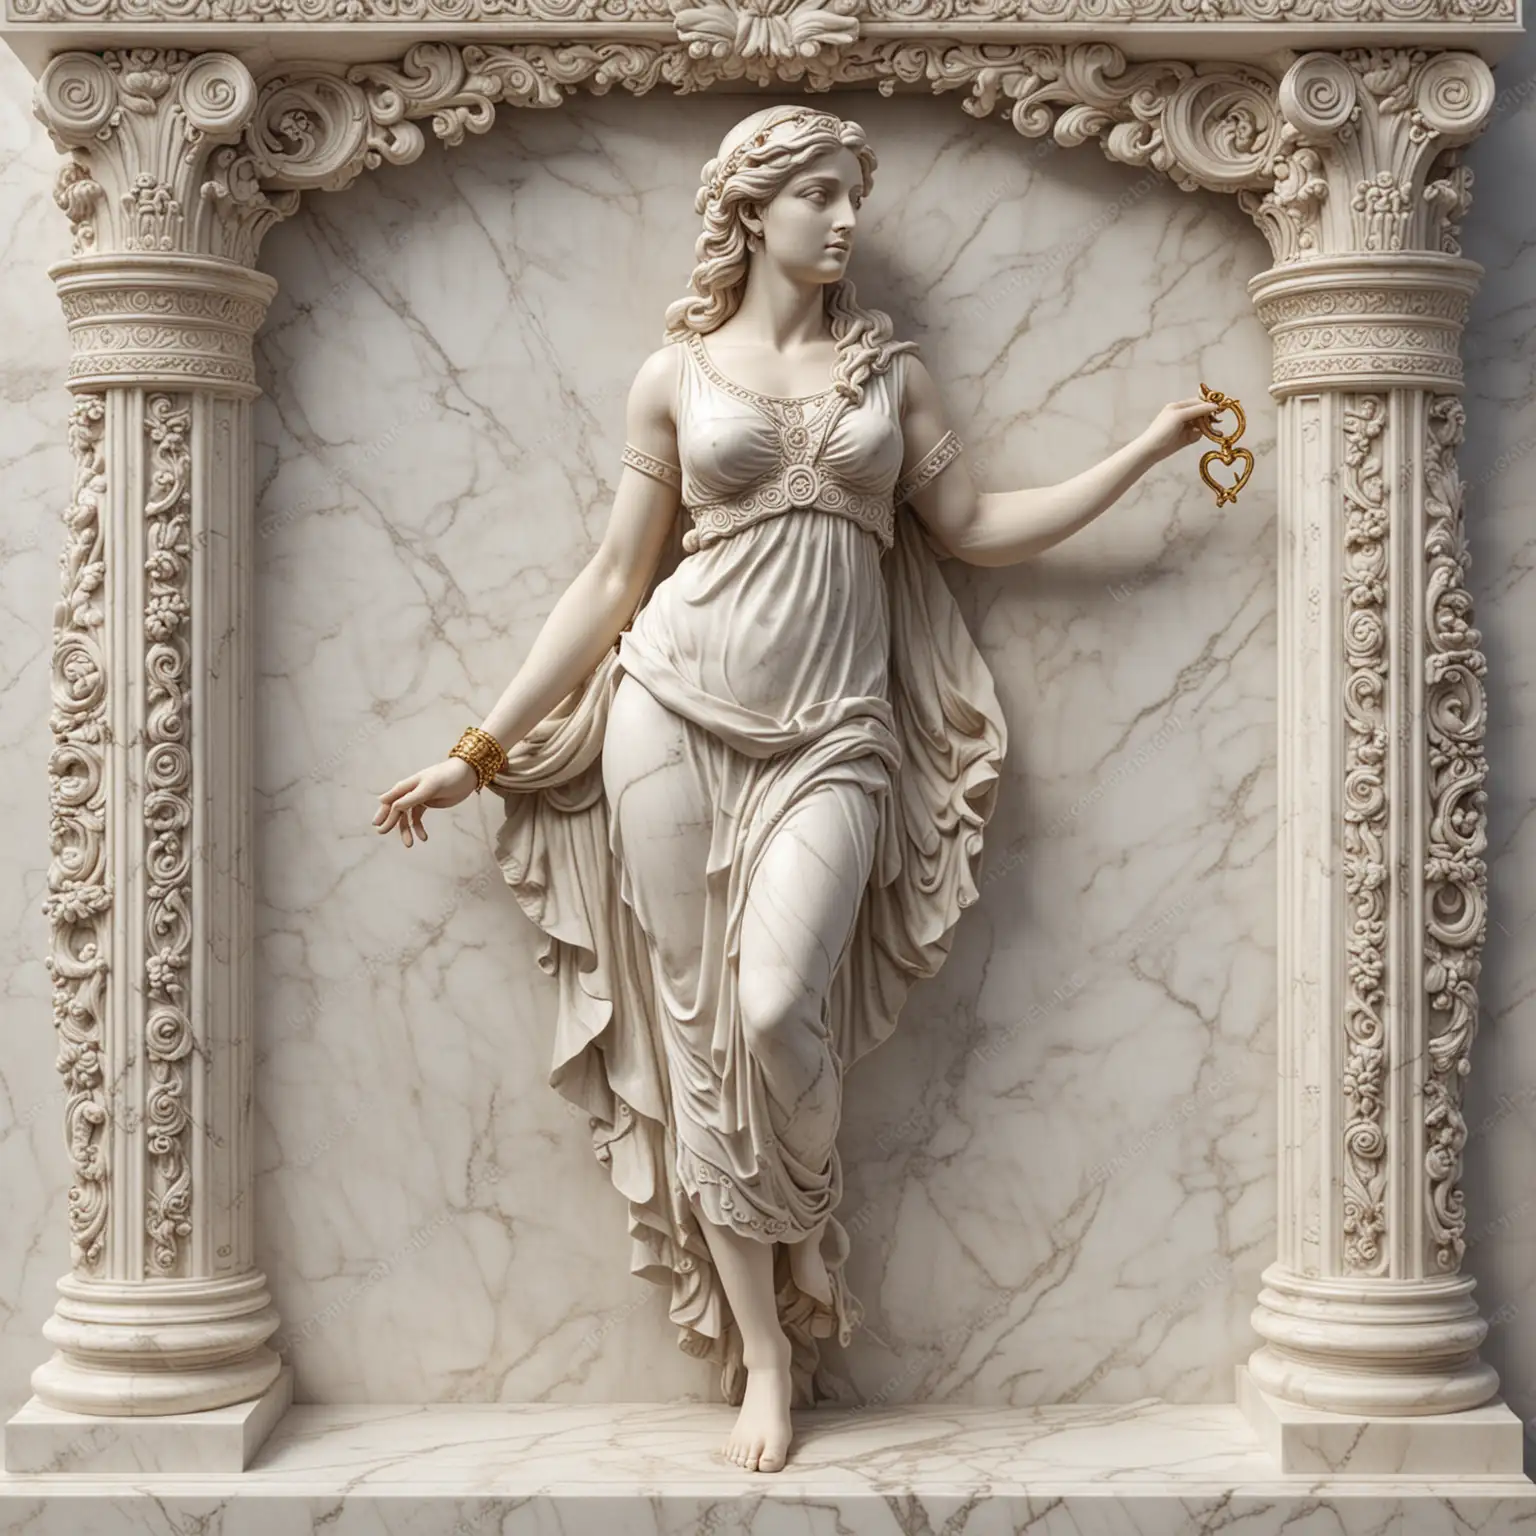 3D  seamless, carved, marble full body, GREEK WOMAN 
with ornate  key pattern marble frame surround
